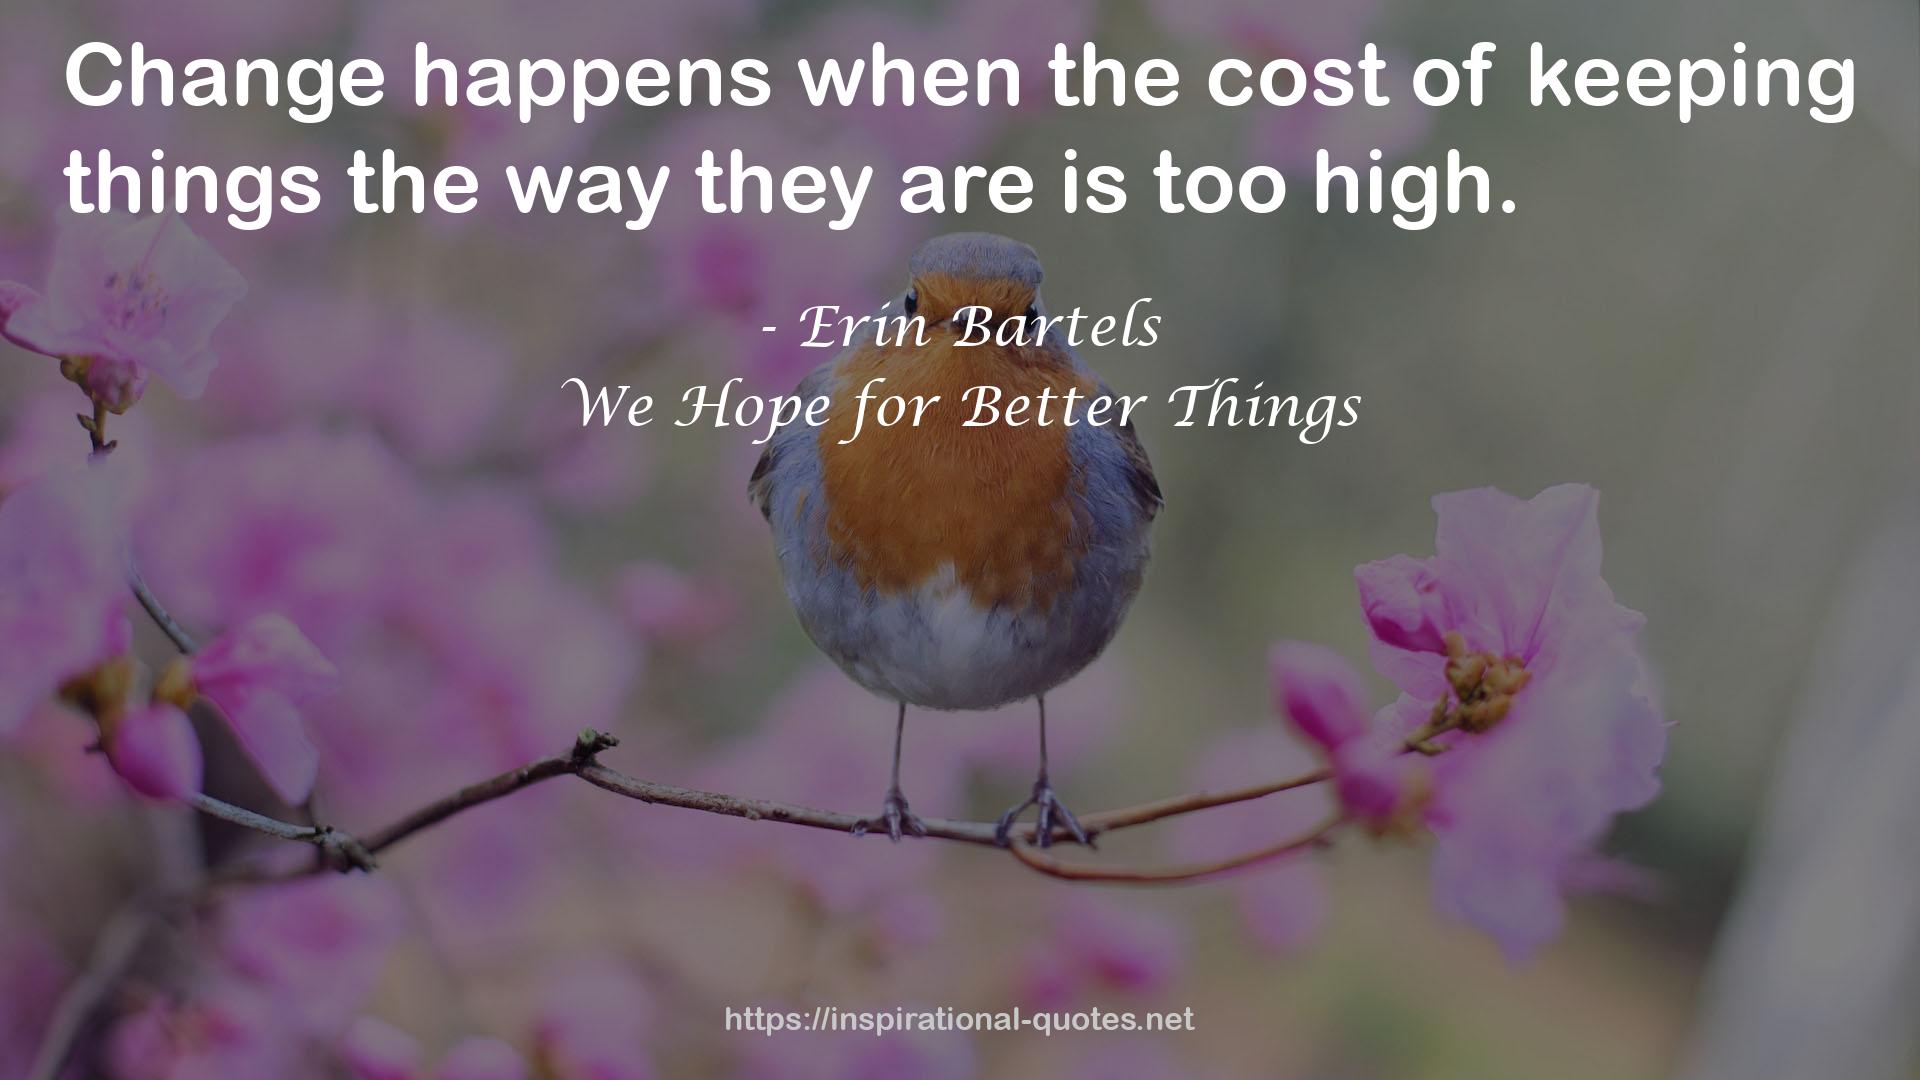 We Hope for Better Things QUOTES